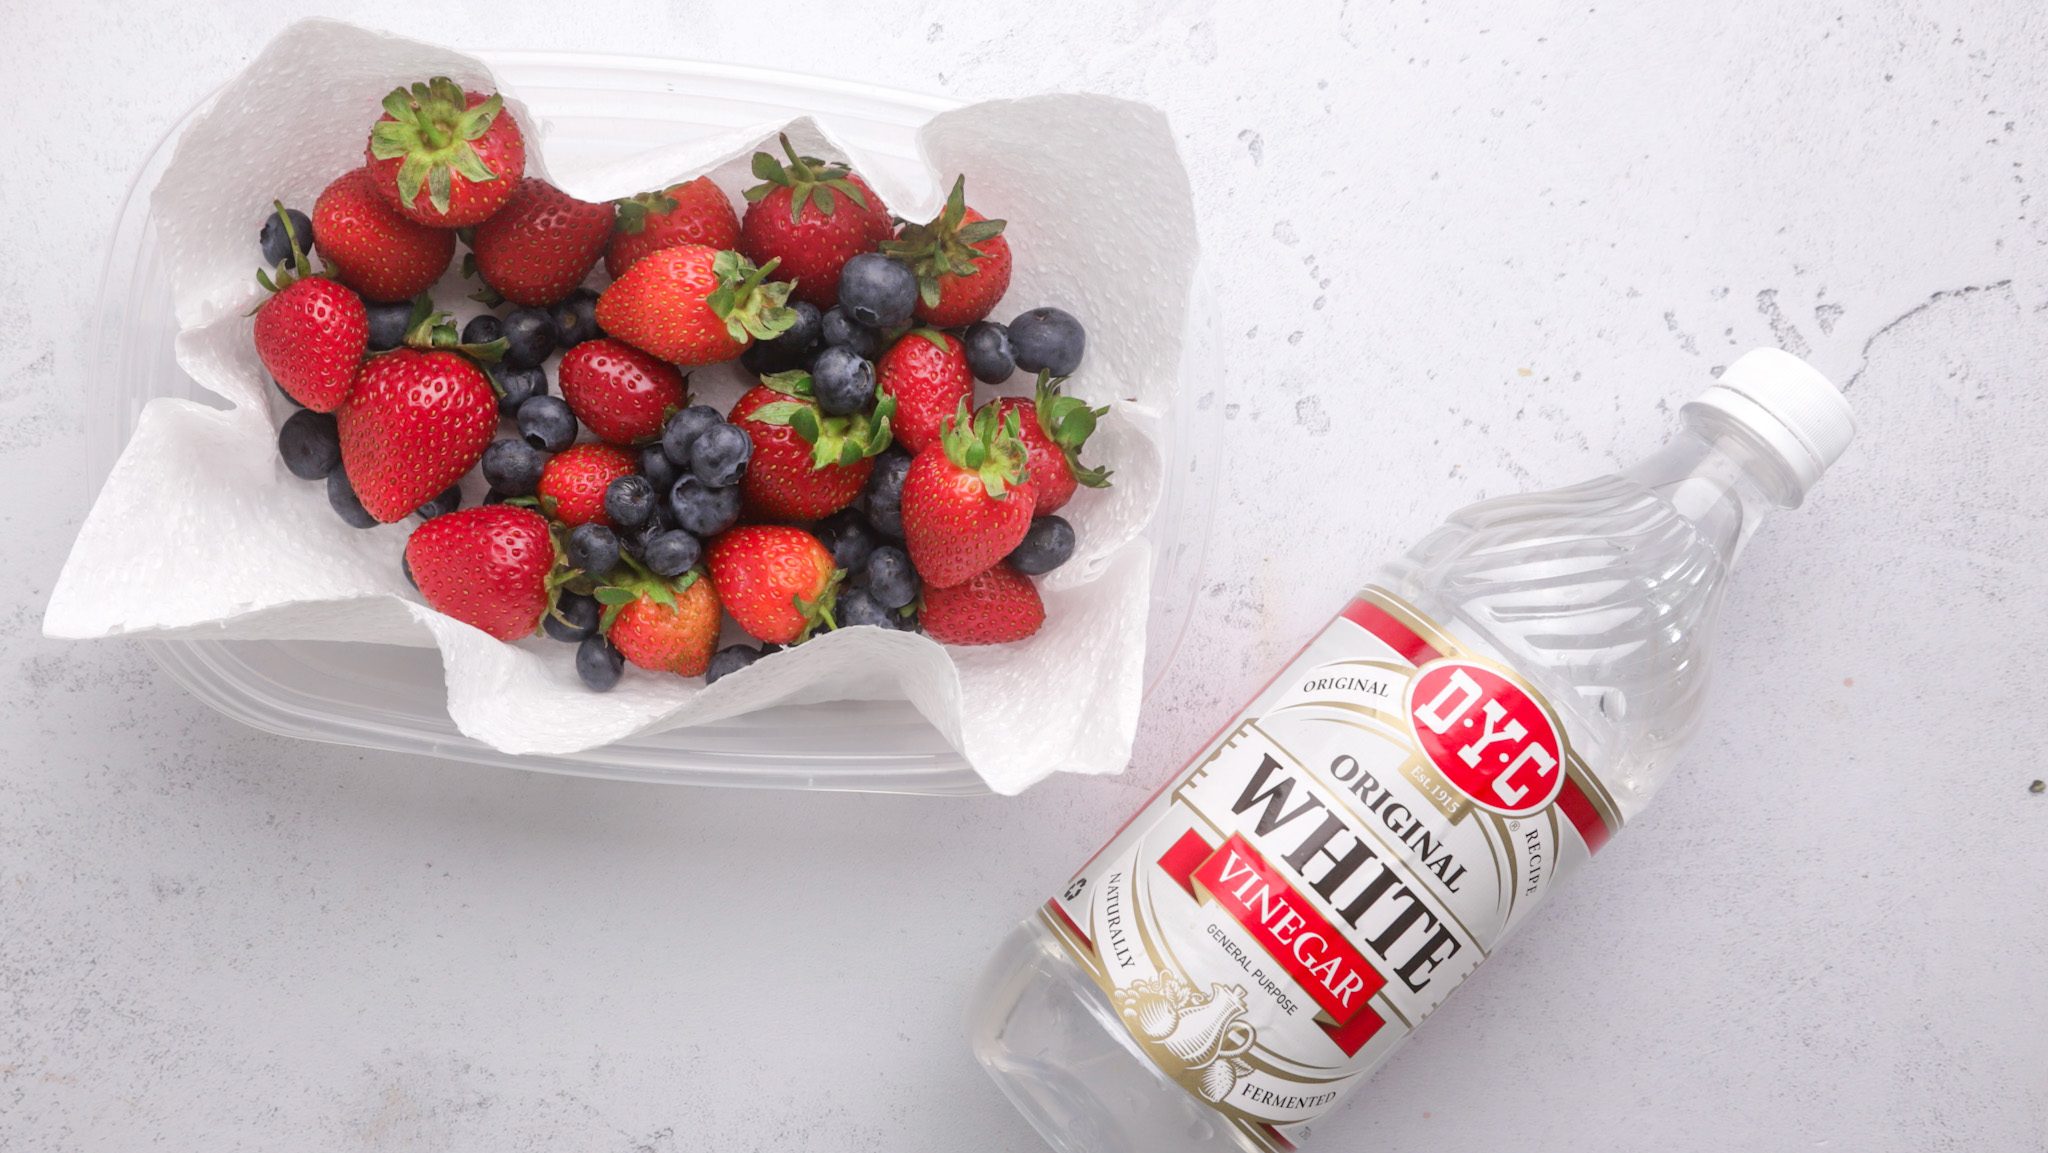 A paper lined container full of summer berries and a bottle of vinegar.